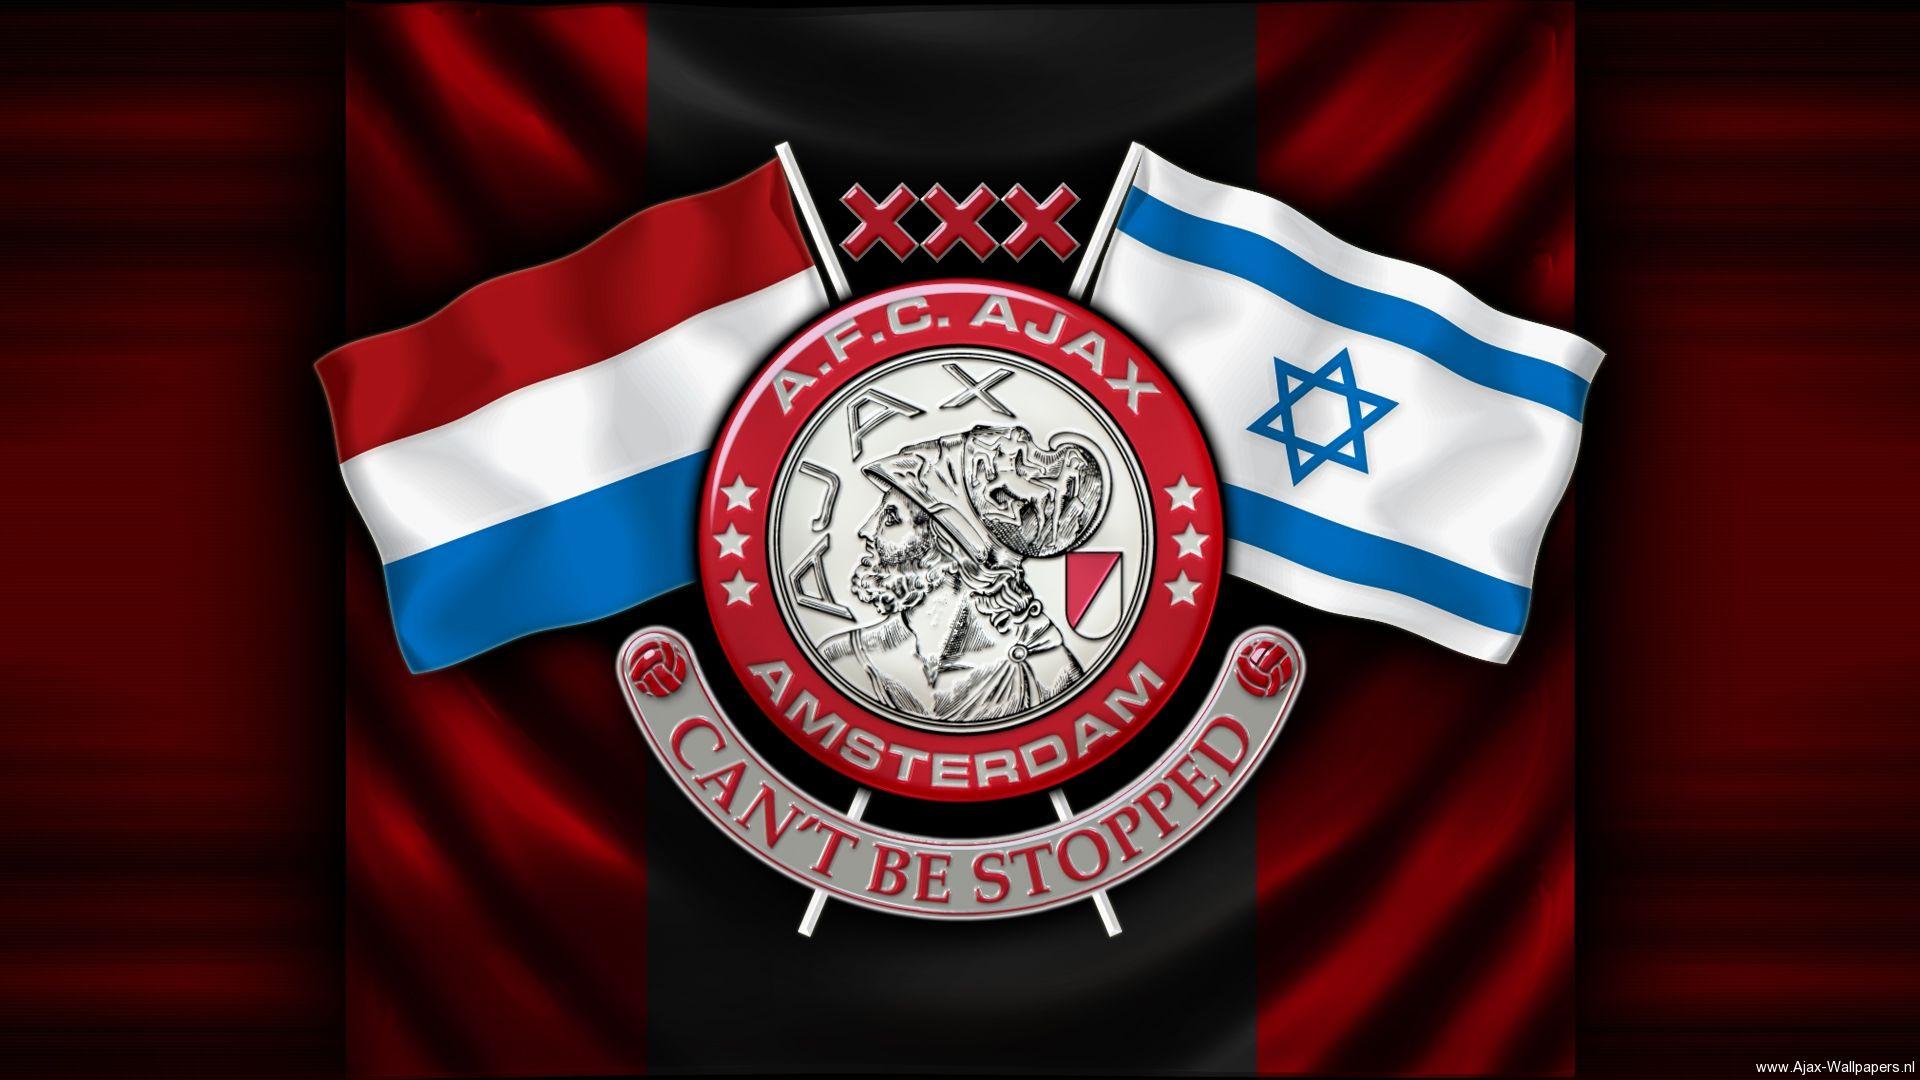 image about A.F.C. Ajax. Logos, Netherlands